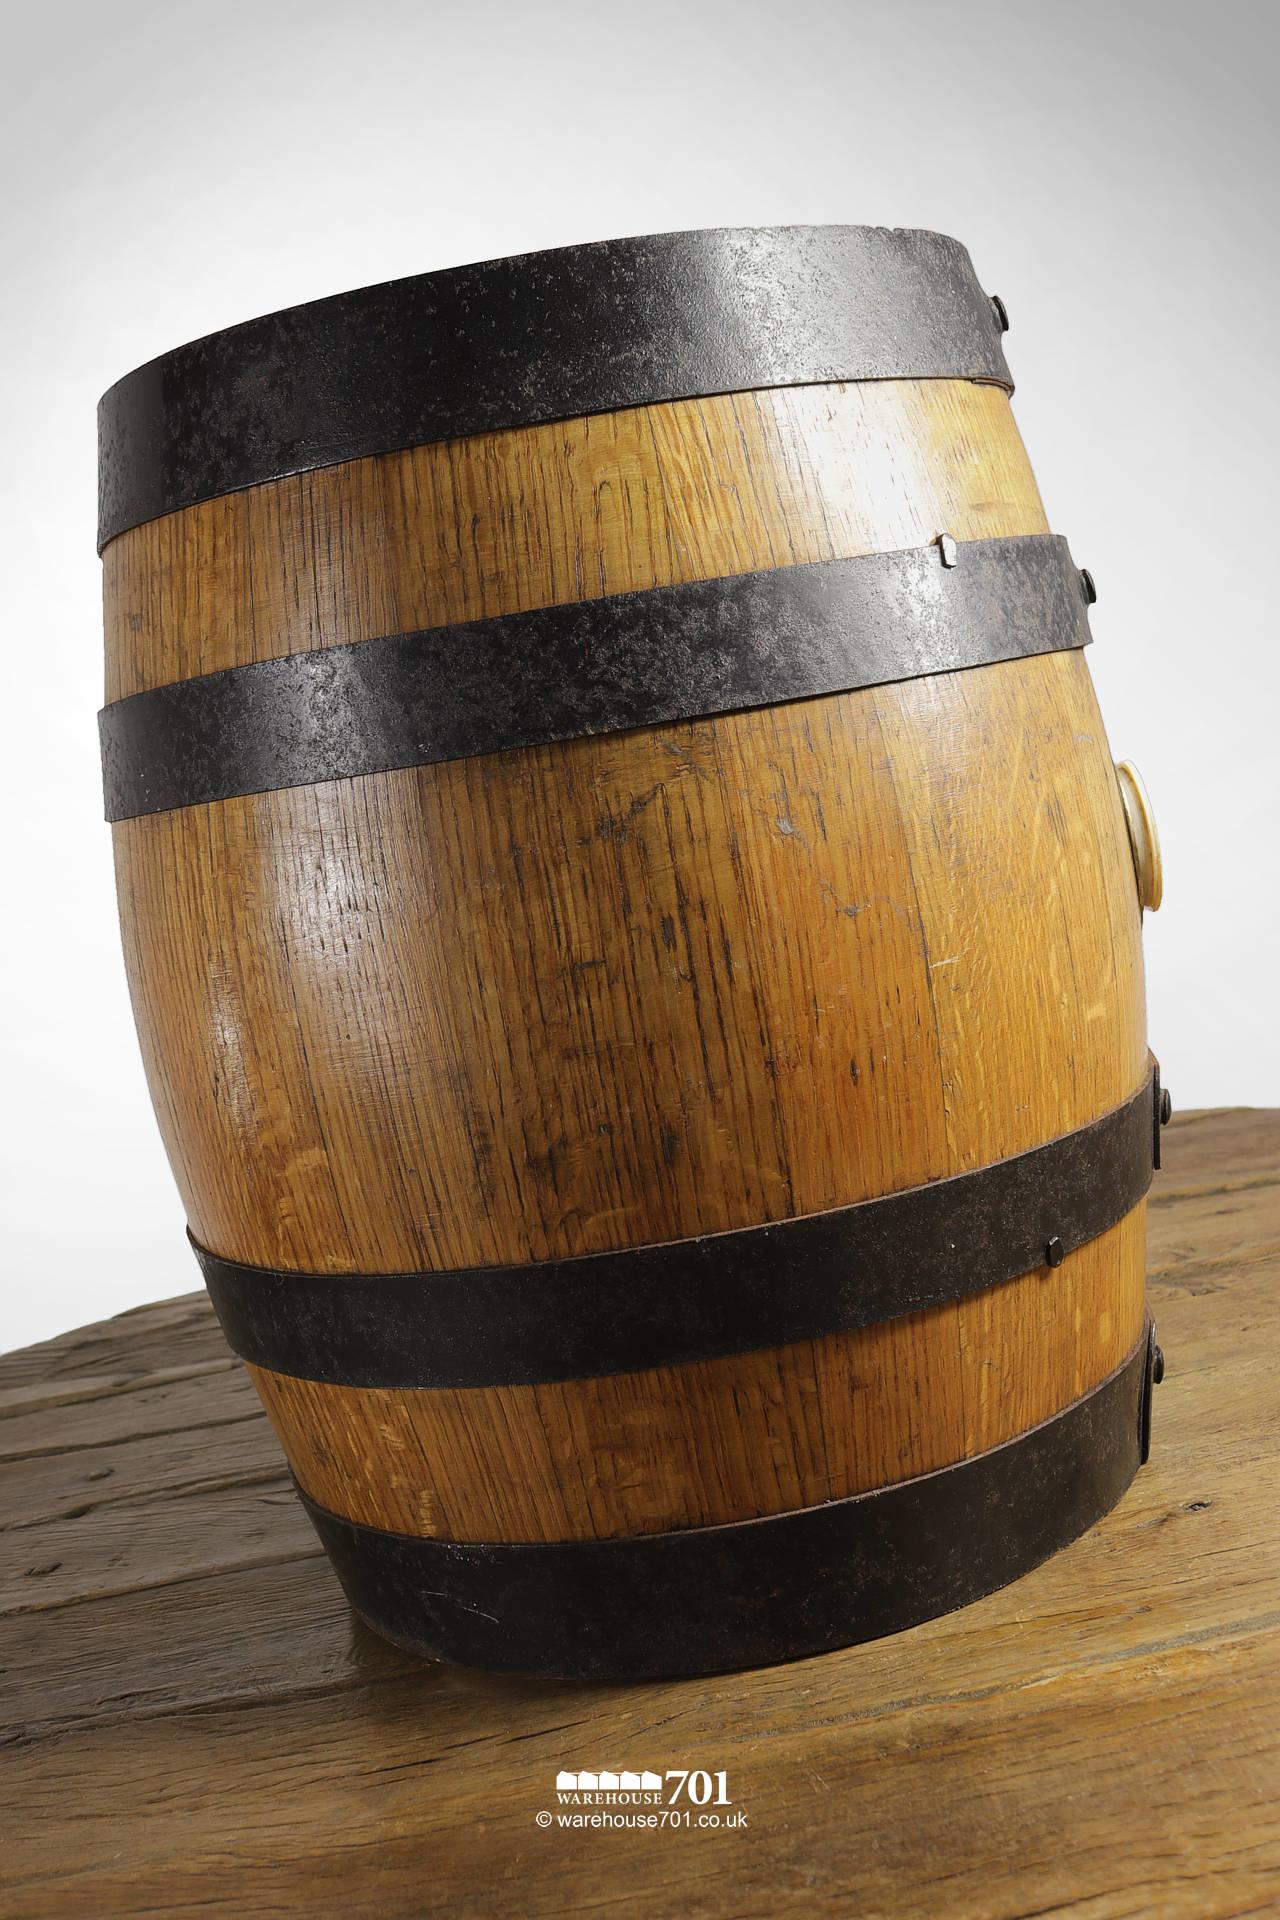 Small Old Hand Coopered Oak Barrel 'Pop Up Pirate' Style Decorative and Functional #2